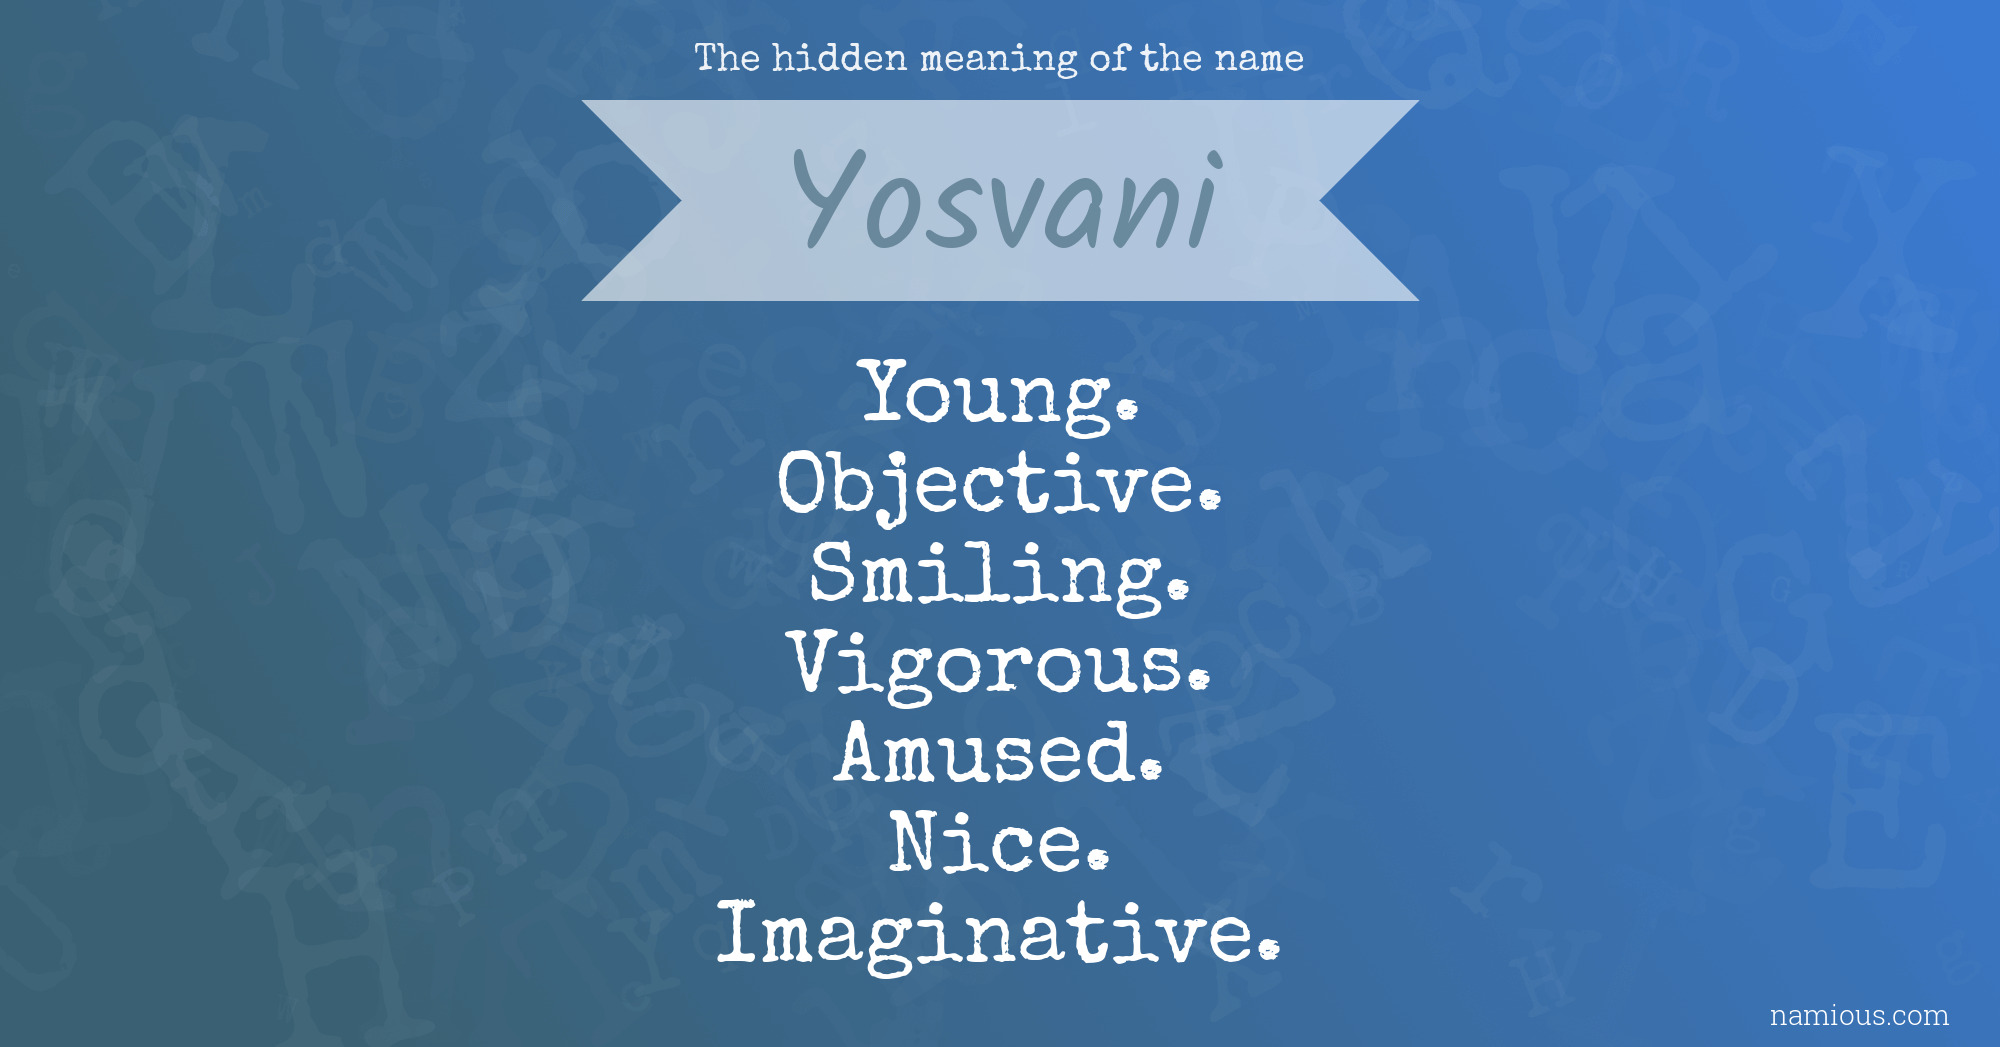 The hidden meaning of the name Yosvani